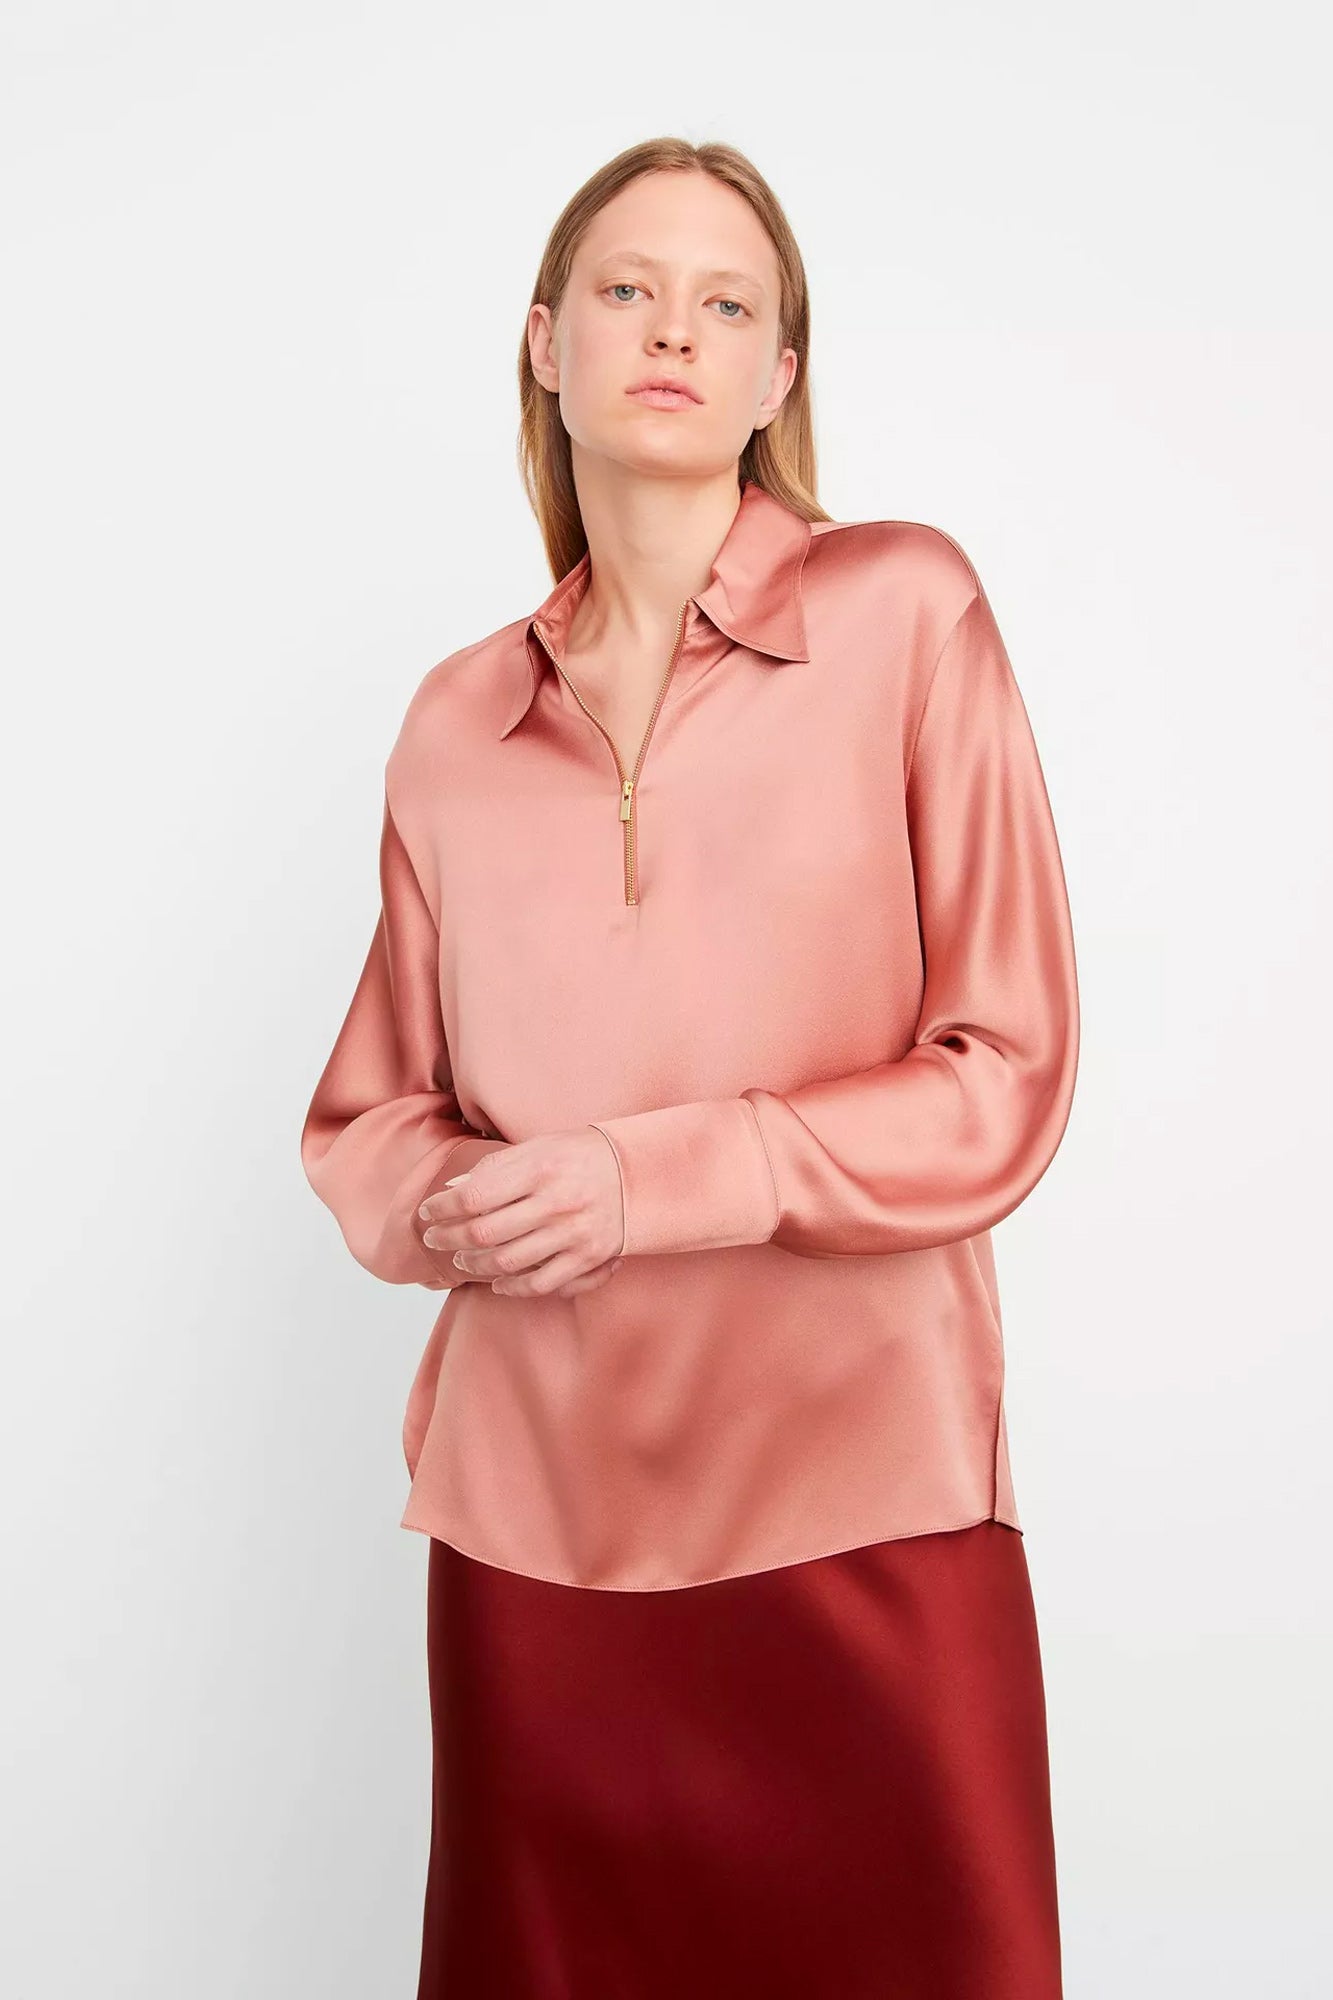 The Long-Sleeve Jewel Zipper Blouse from Vince is the perfect combination of professional and stylish.